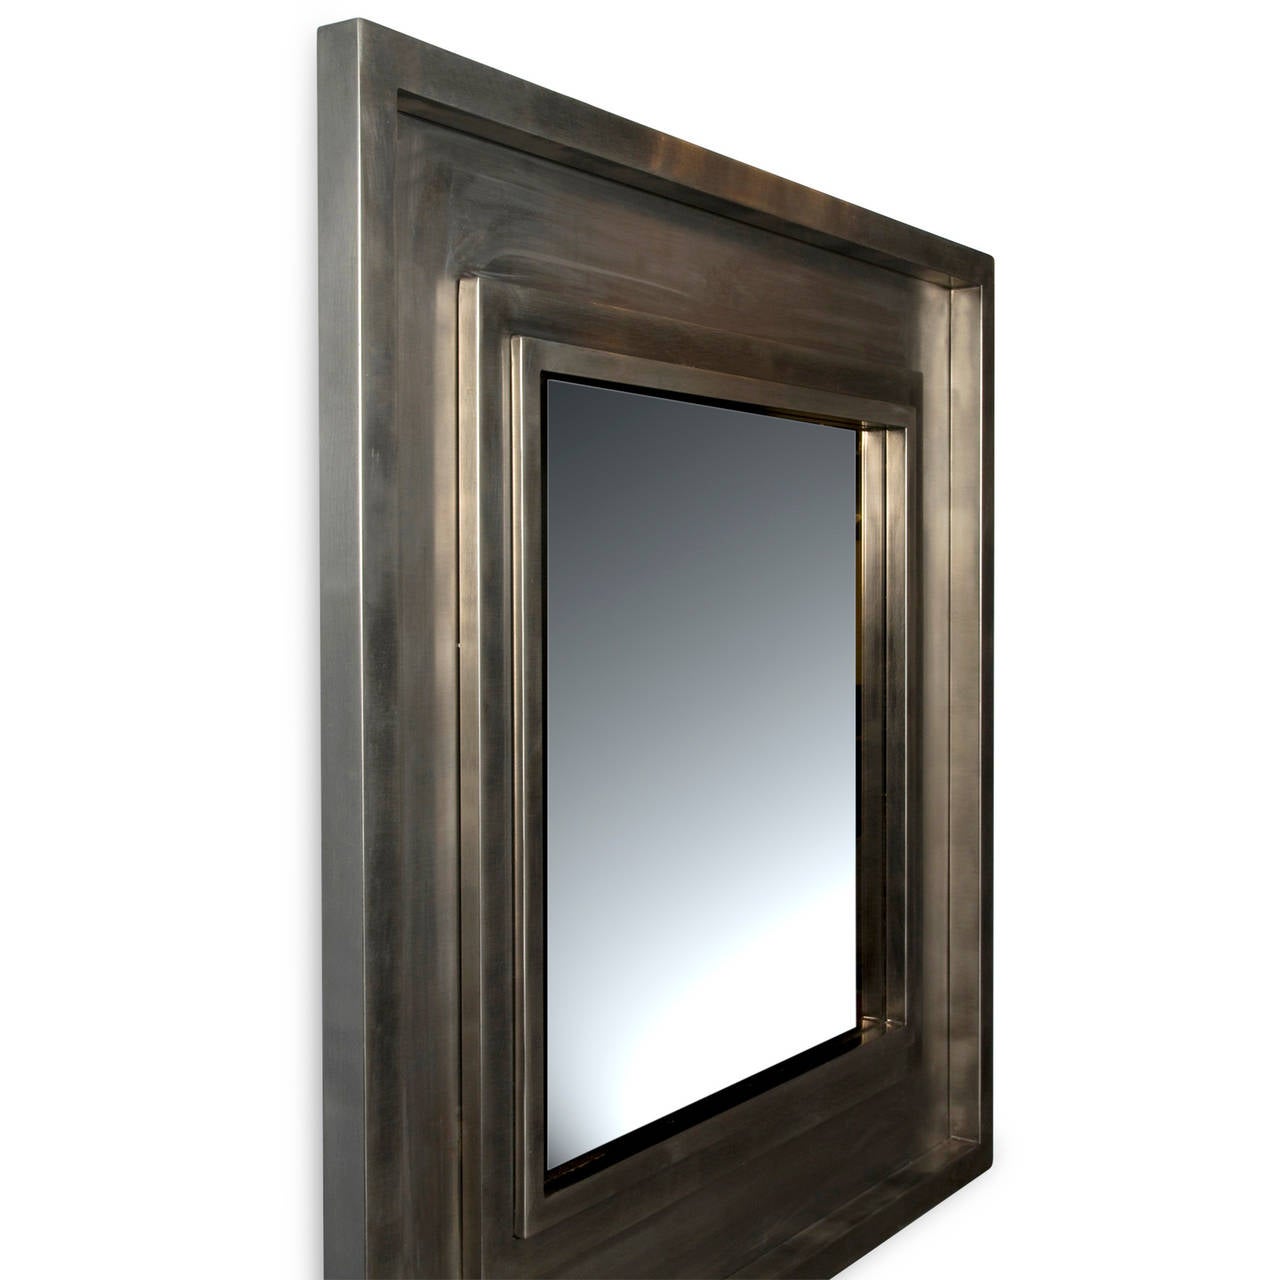 Brushed stainless steel square frame mirror, the frame composed of superimposed squares giving sense of depth and movement, French 1970s. 42 1/2 inches square. (Item #1439)